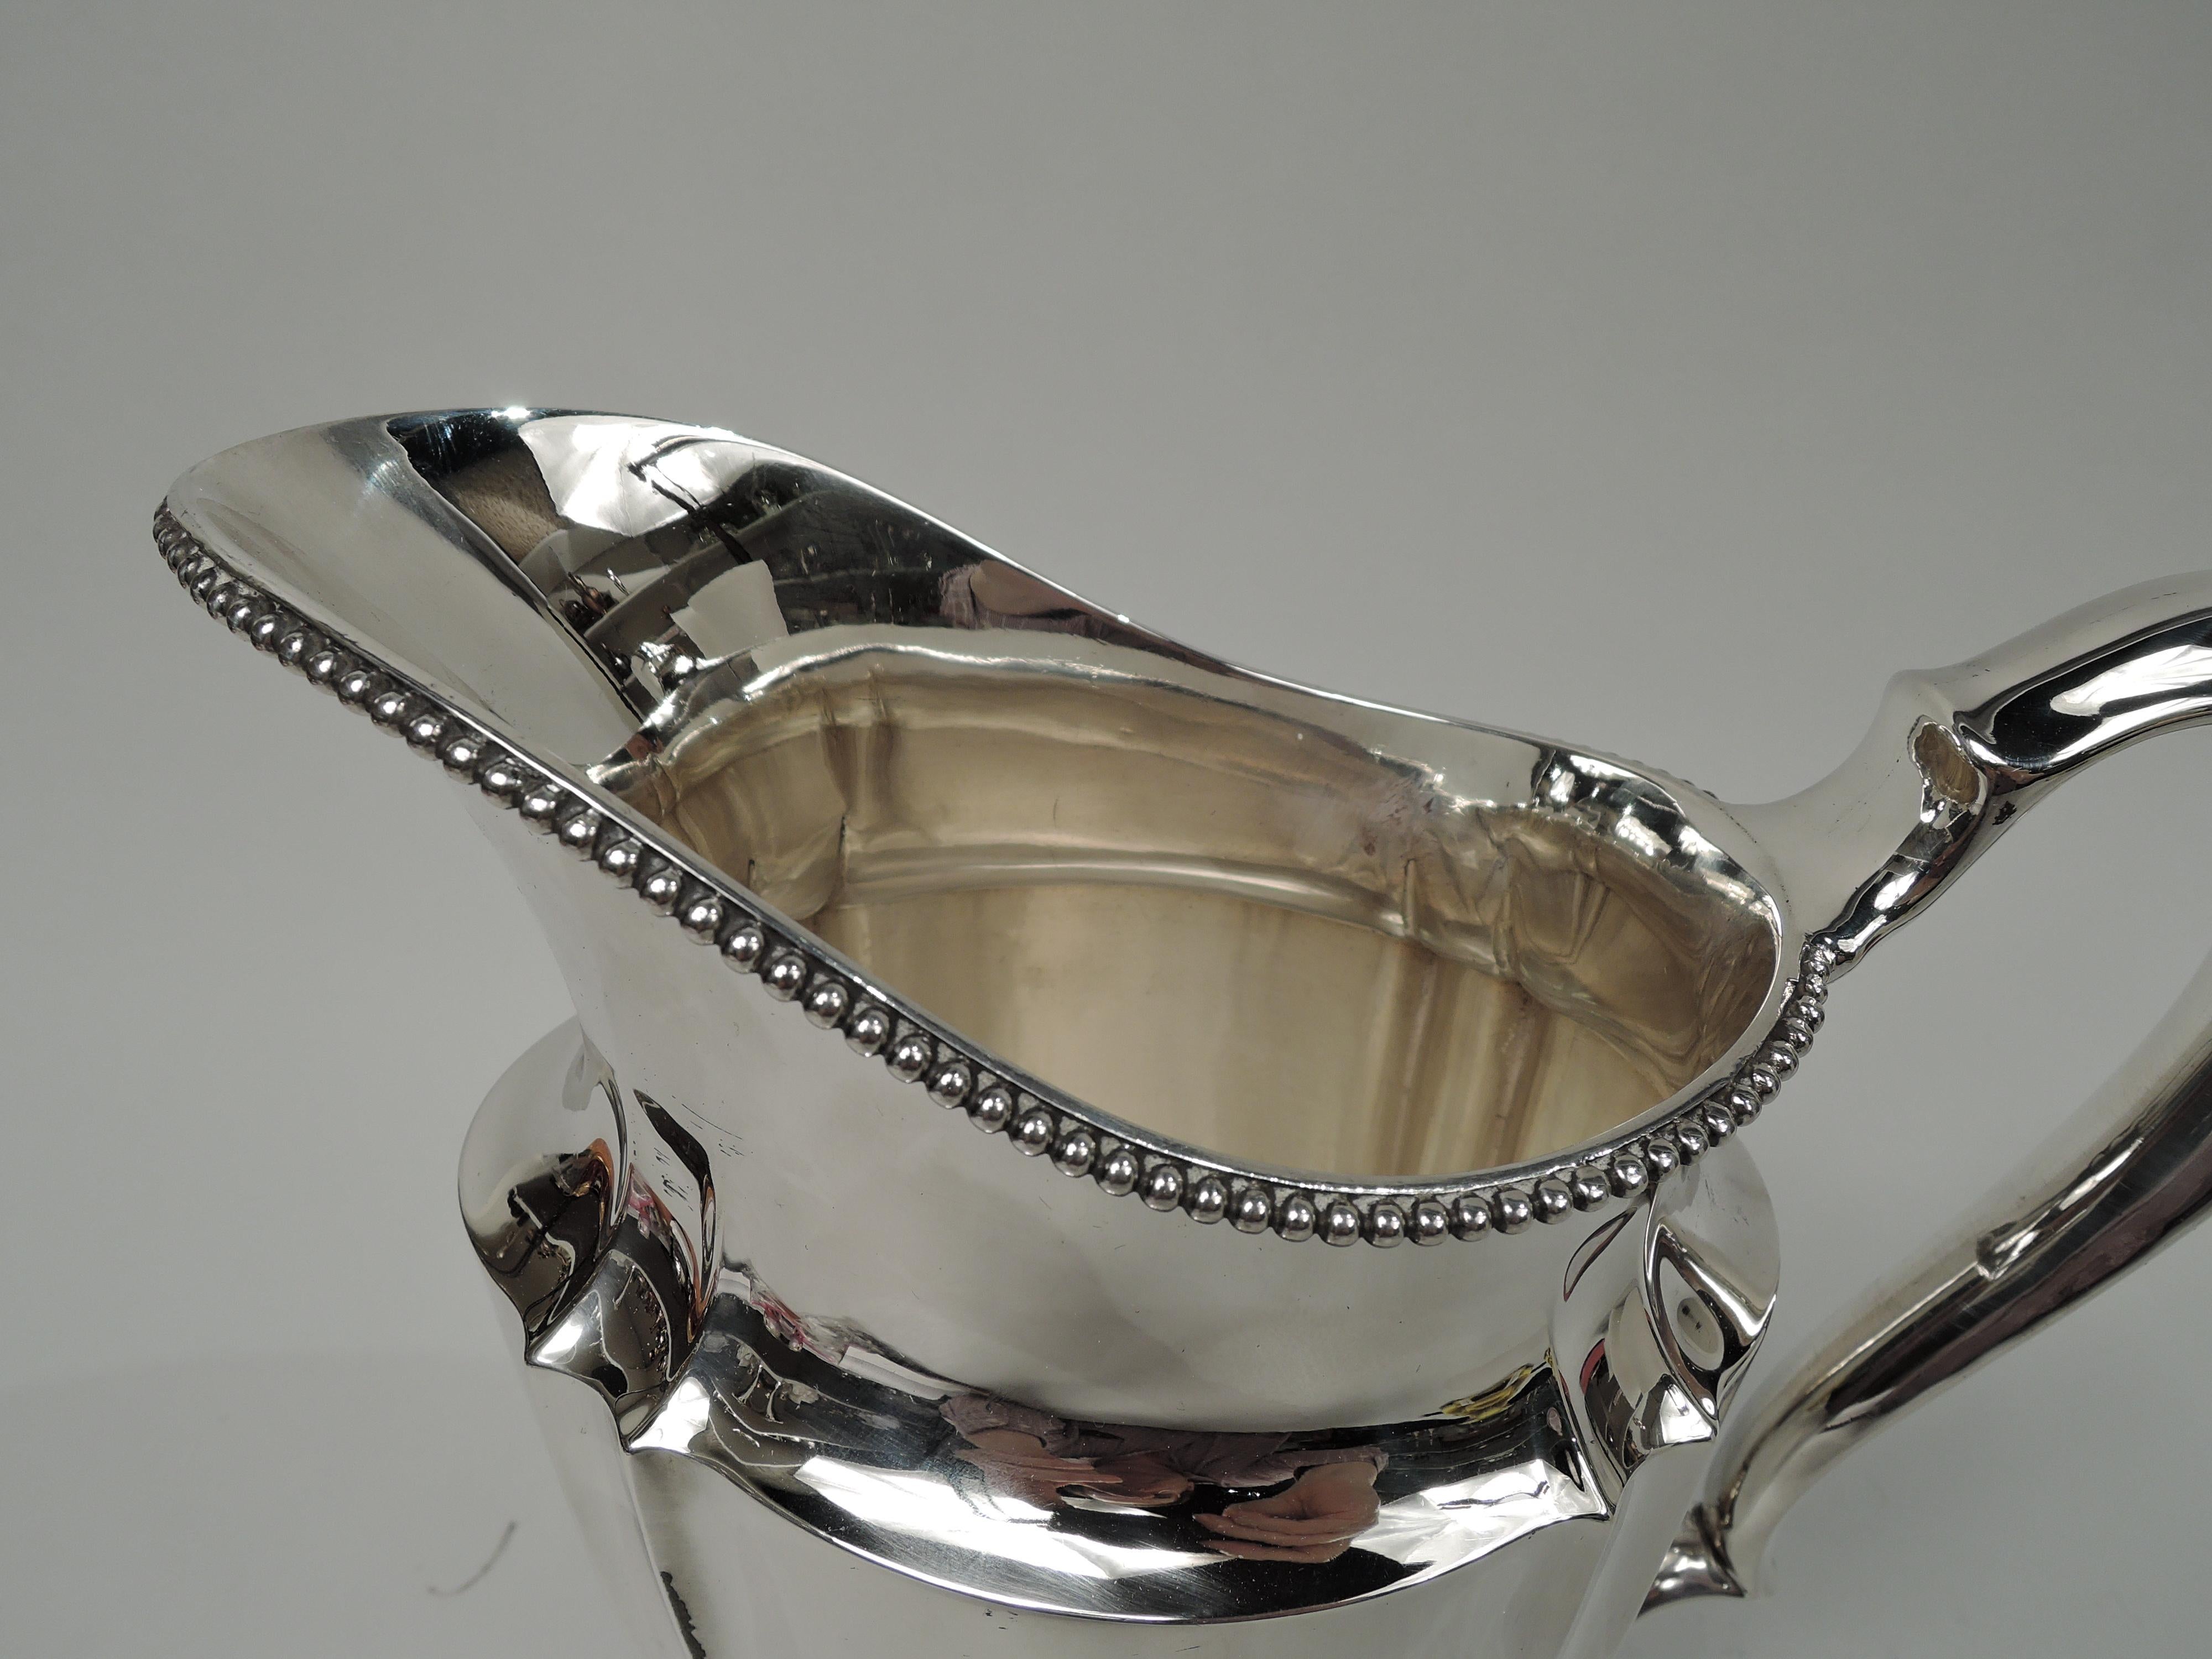 Victorian Classical sterling silver water pitcher. Made by Tiffany & Co. in New York. Tapering and fluted ovoid body, beaded helmet mouth, and high-looping double-scroll handle. Four cast leafing scroll supports. Fully marked including maker’s